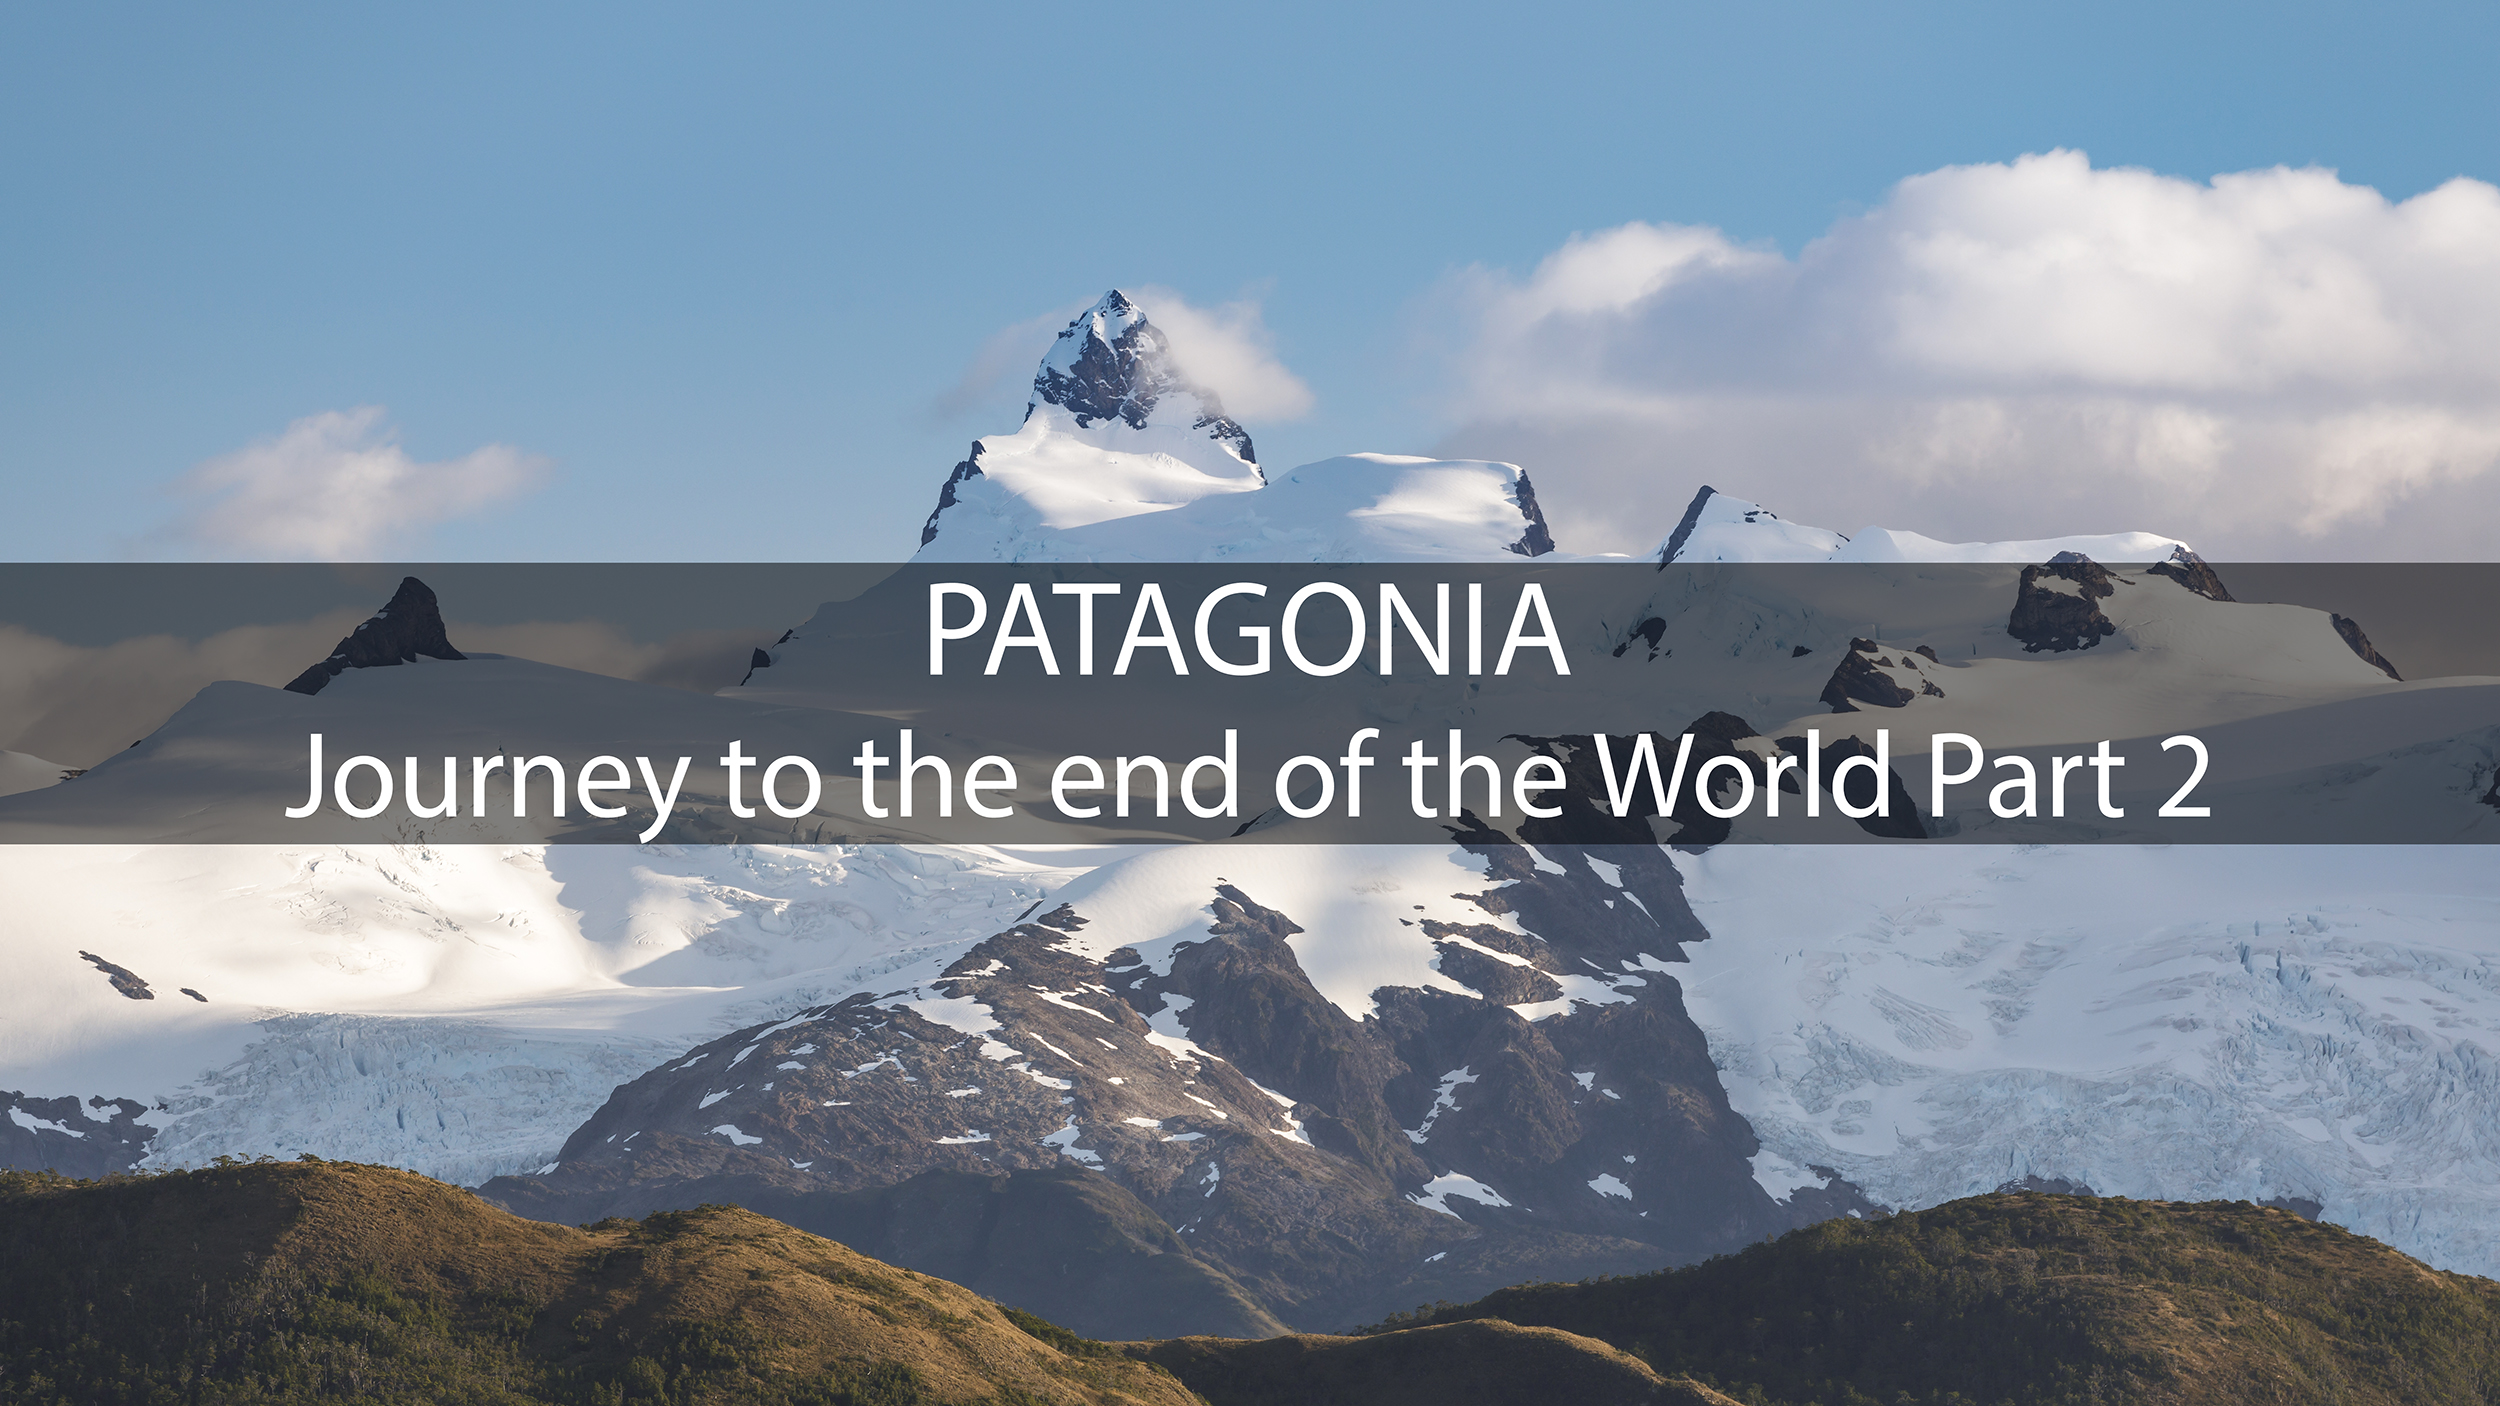 Patagonia Journey to the end of the world. Landscape photography in Chile.